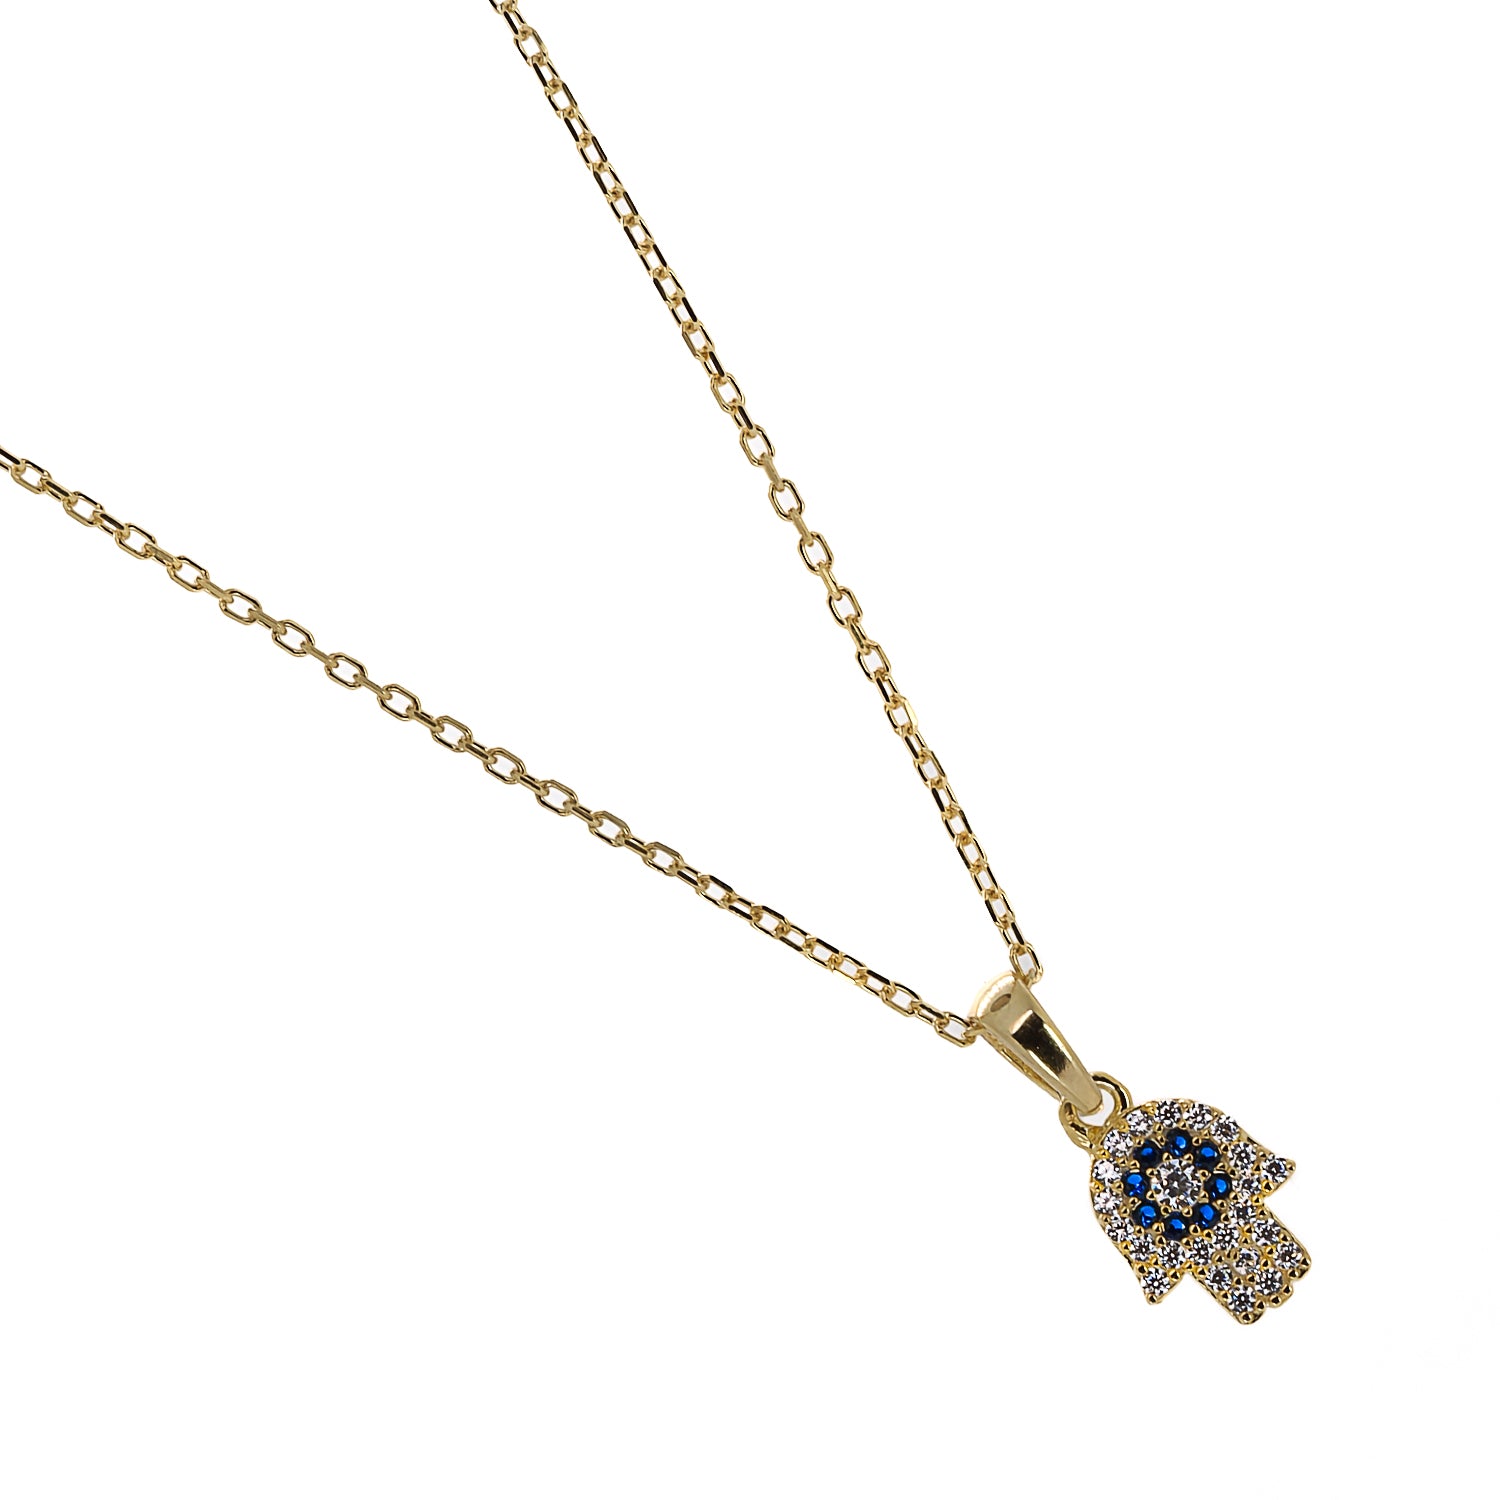 Gold Vermeil Hamsa Hand Pendant Adorned with Meticulously Placed Zircon Stones.